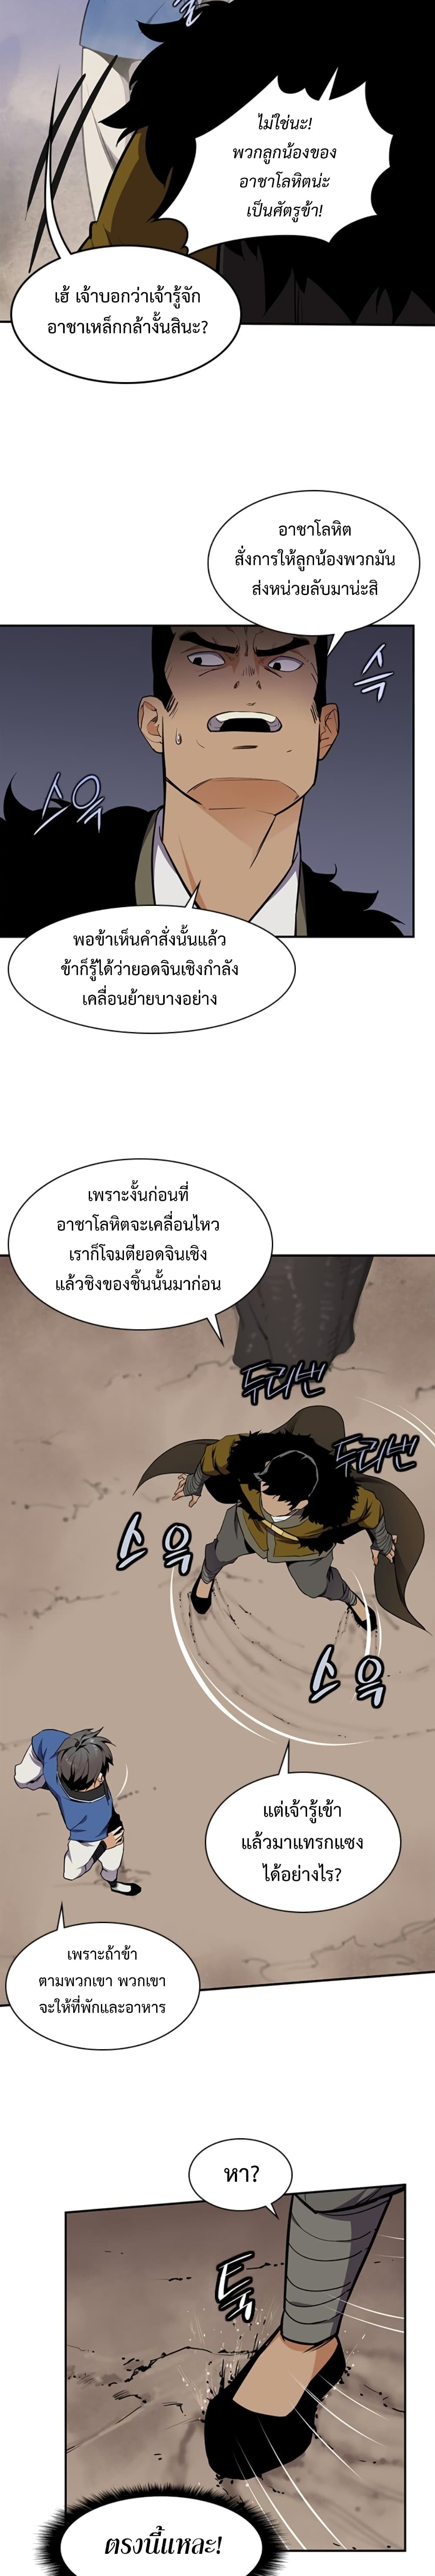 The Strongest Ever à¸à¸­à¸à¸à¸µà¹ 31 (7)